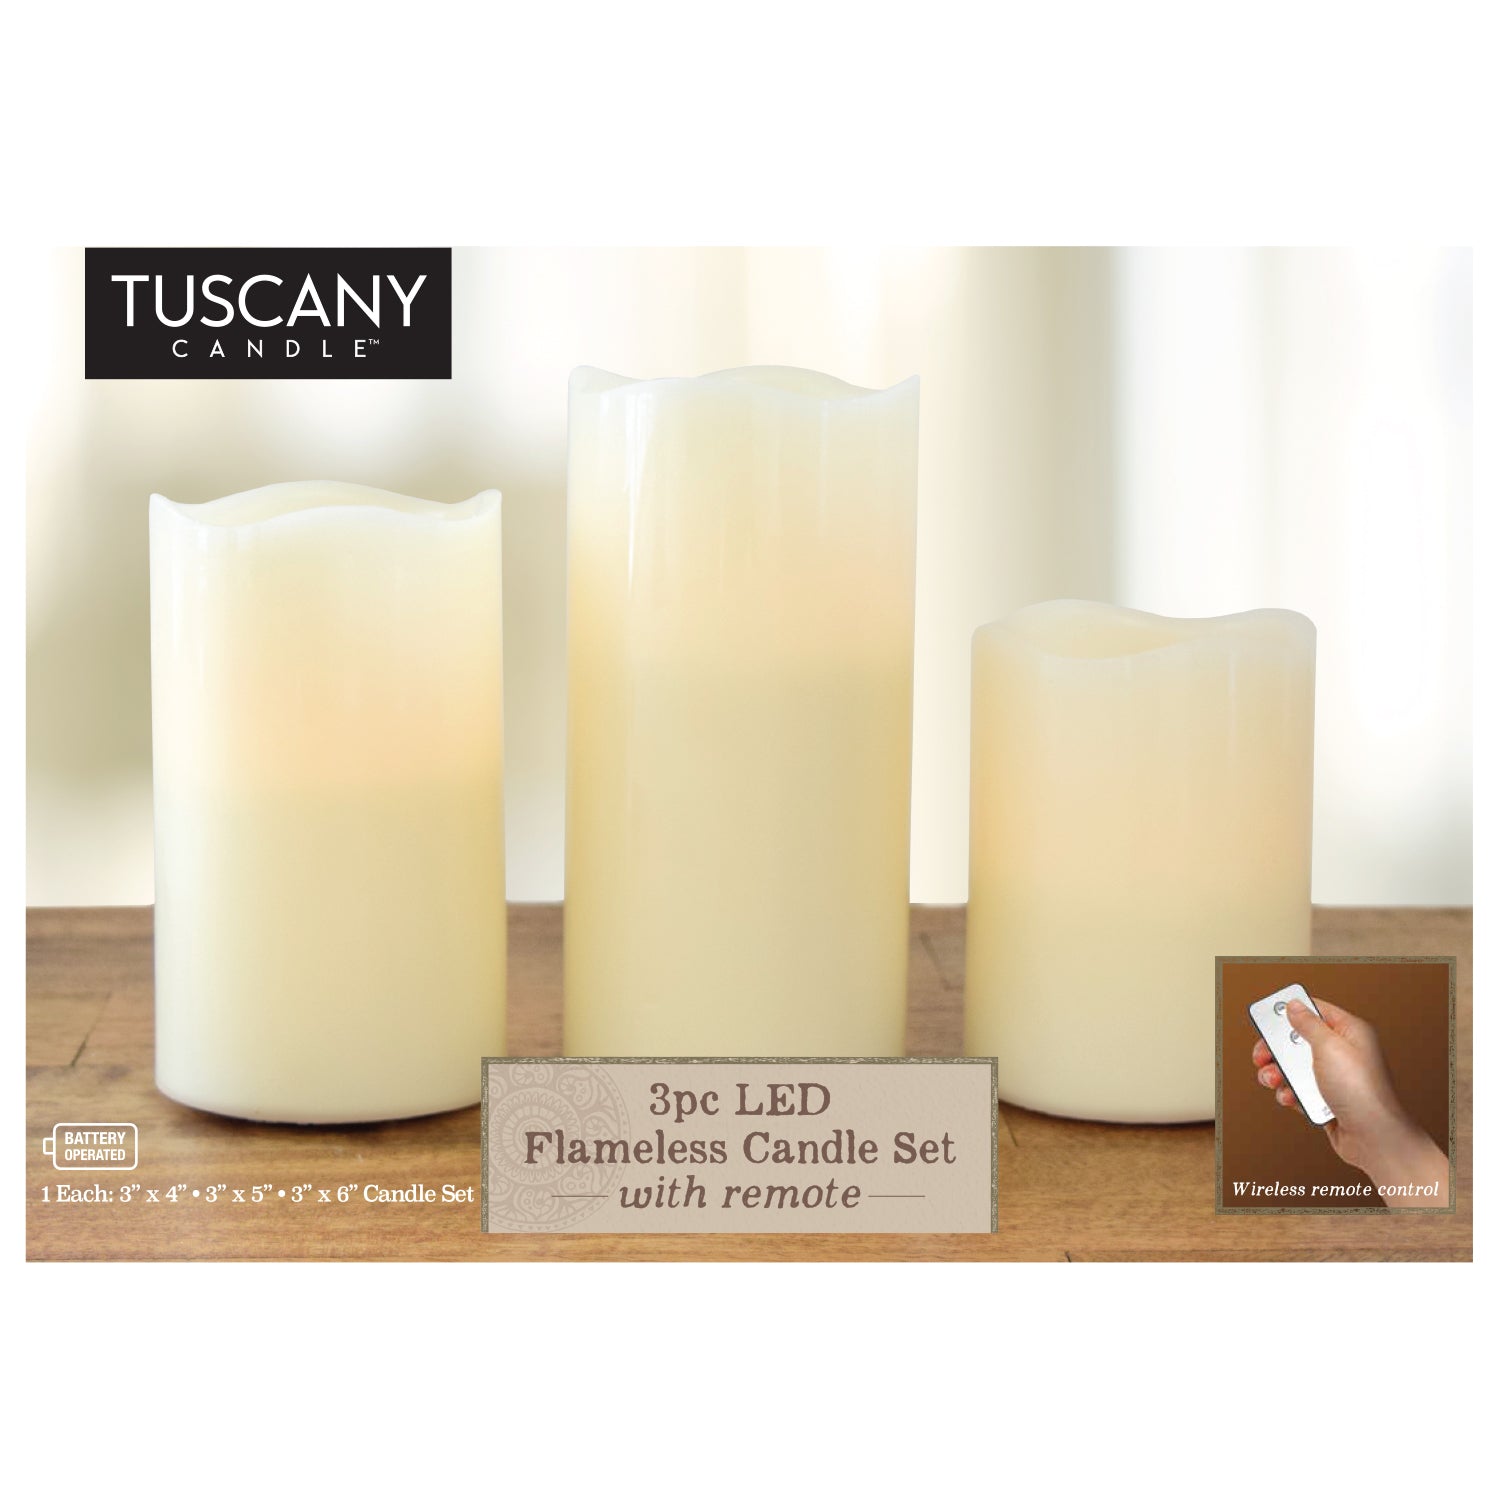 Tuscany 3-Piece White LED flameless candle set with remote control.